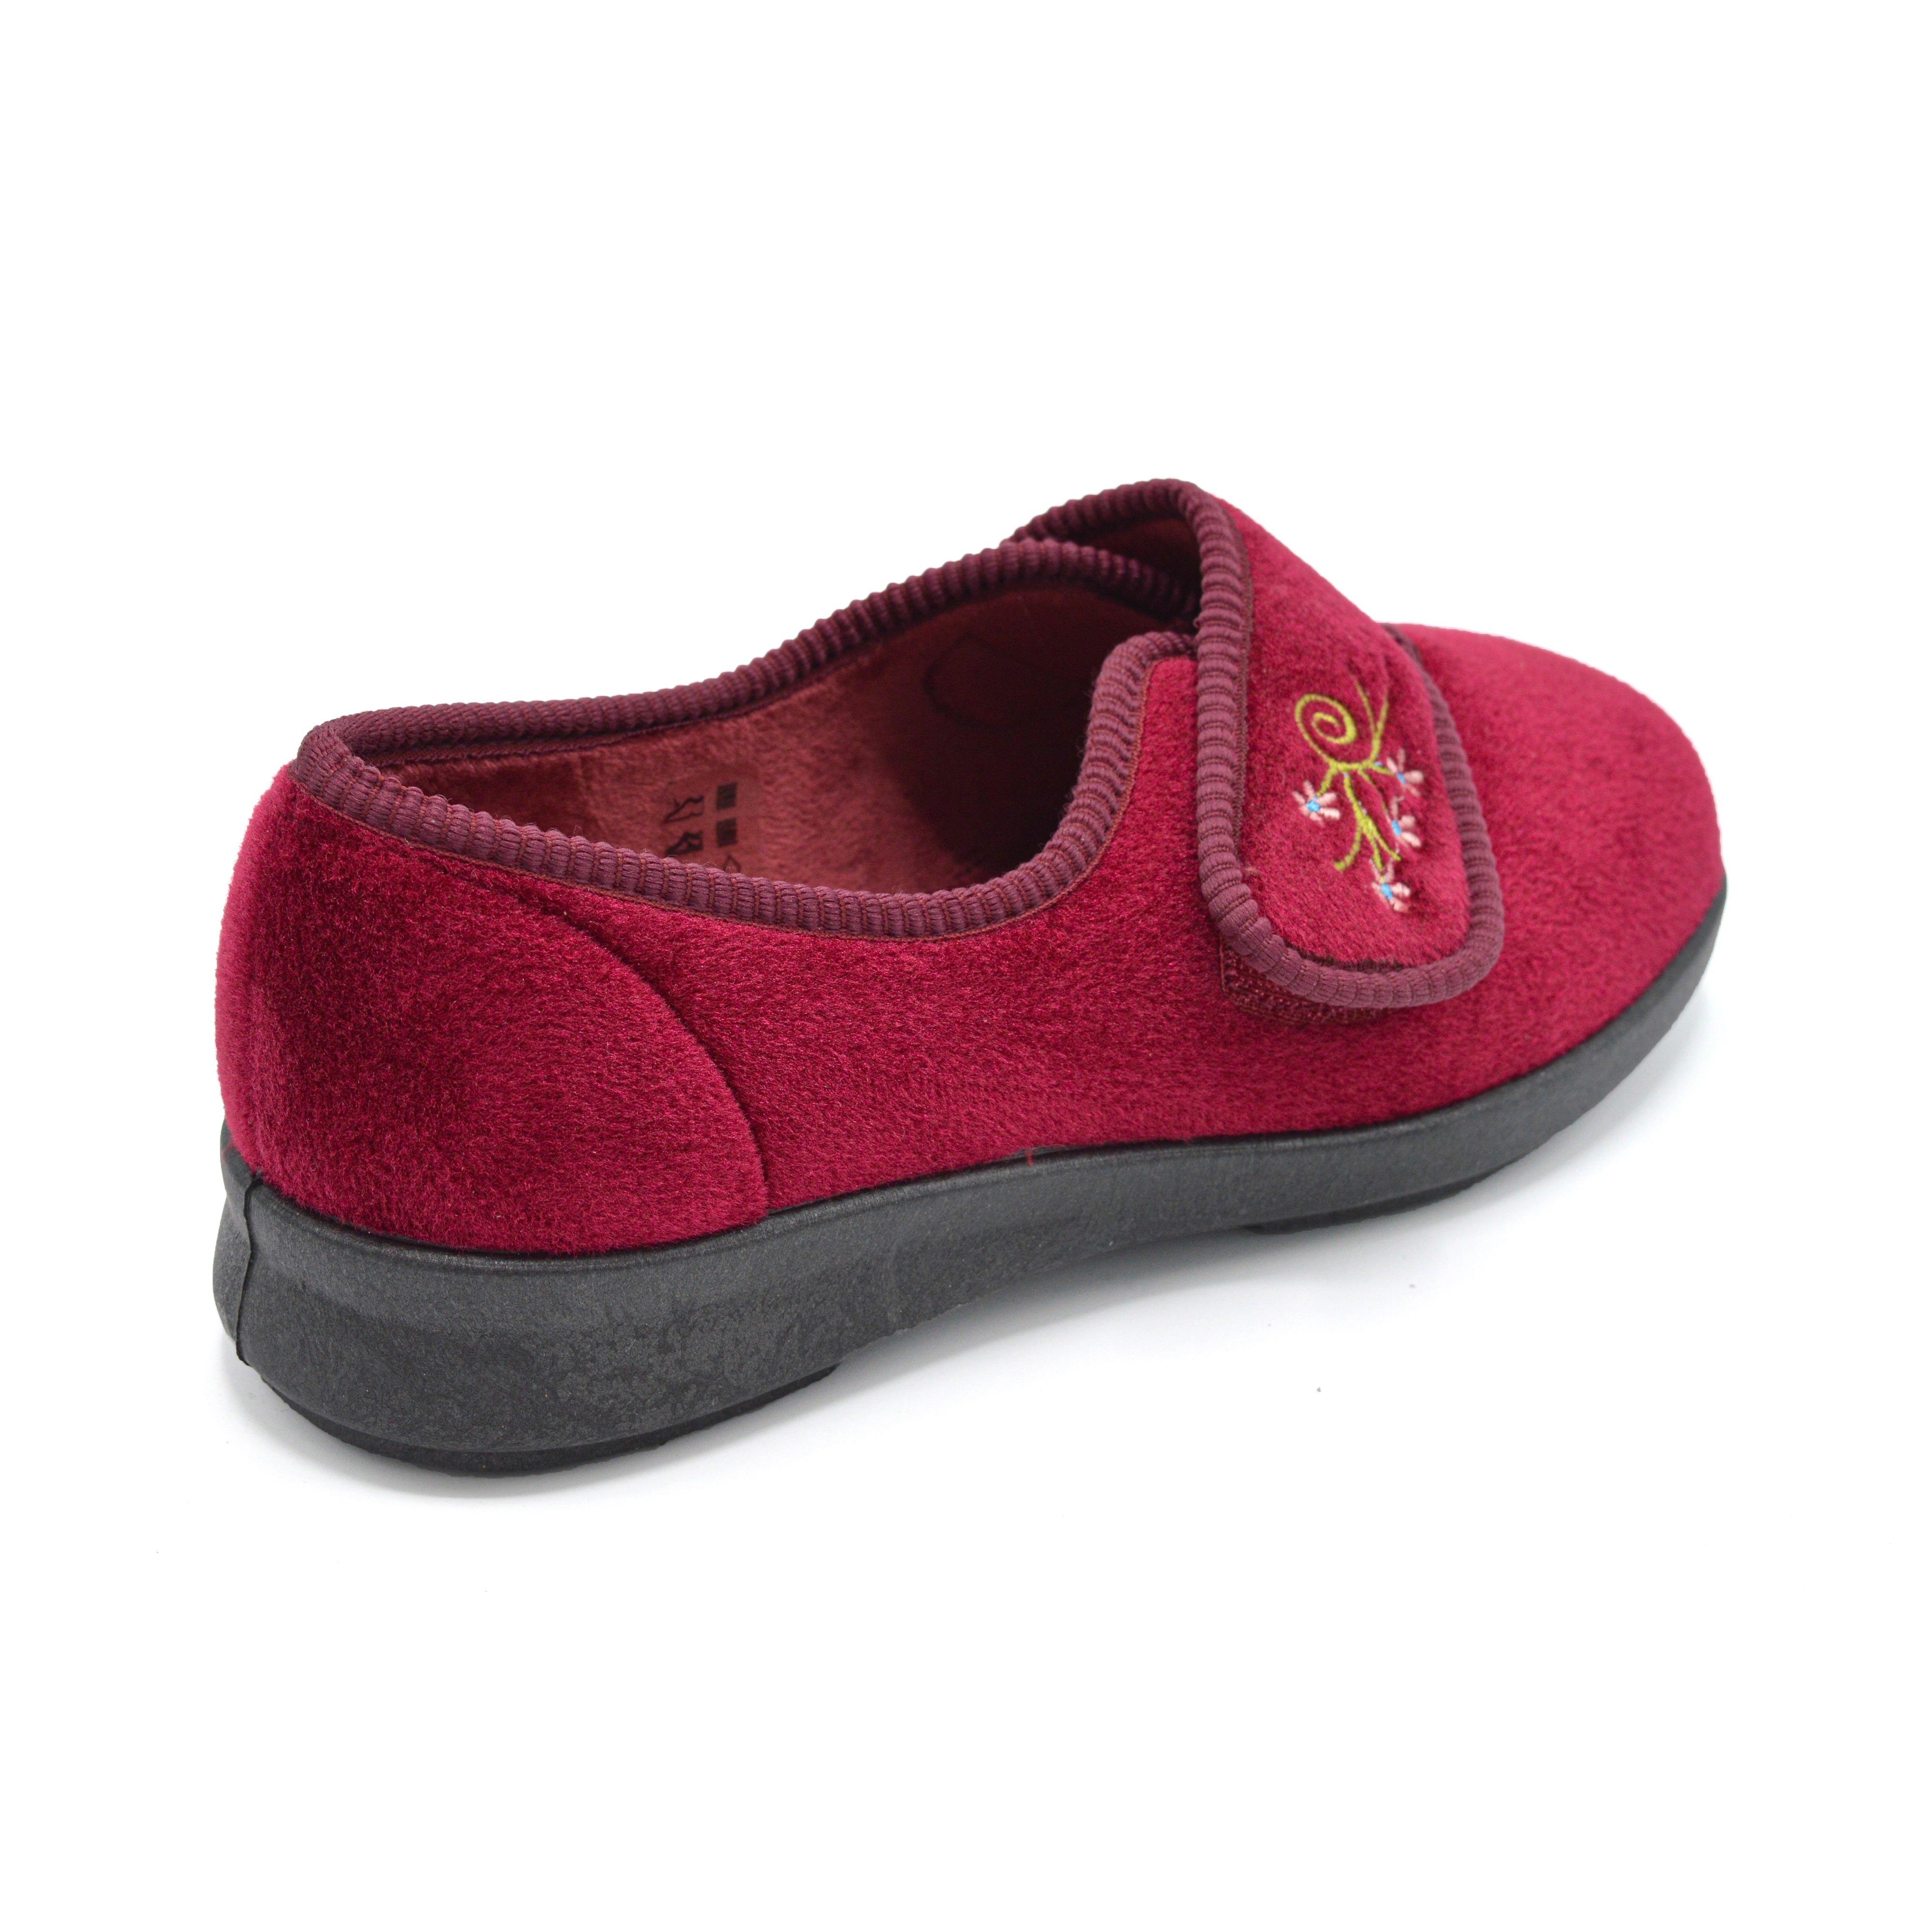 High-Quality Velcro Slippers For Bunions